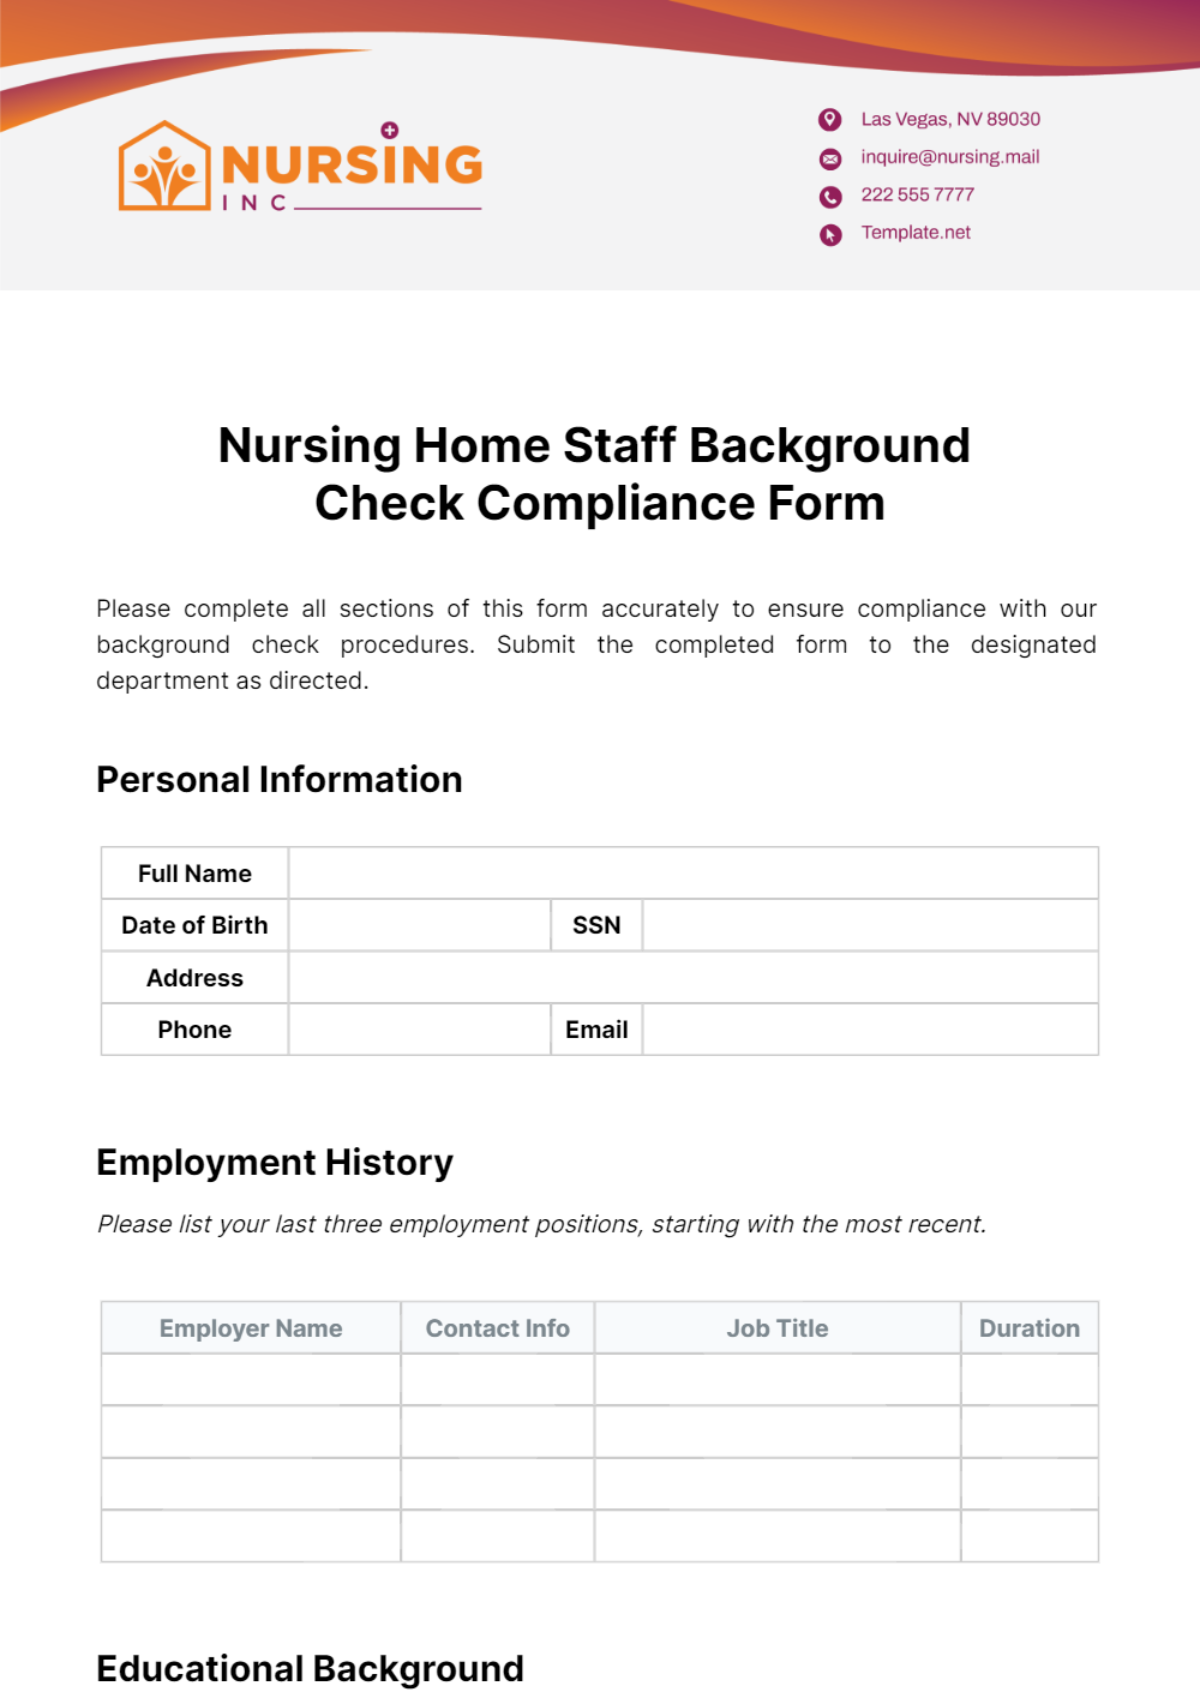 Free Nursing Home Staff Background Check Compliance Form Template